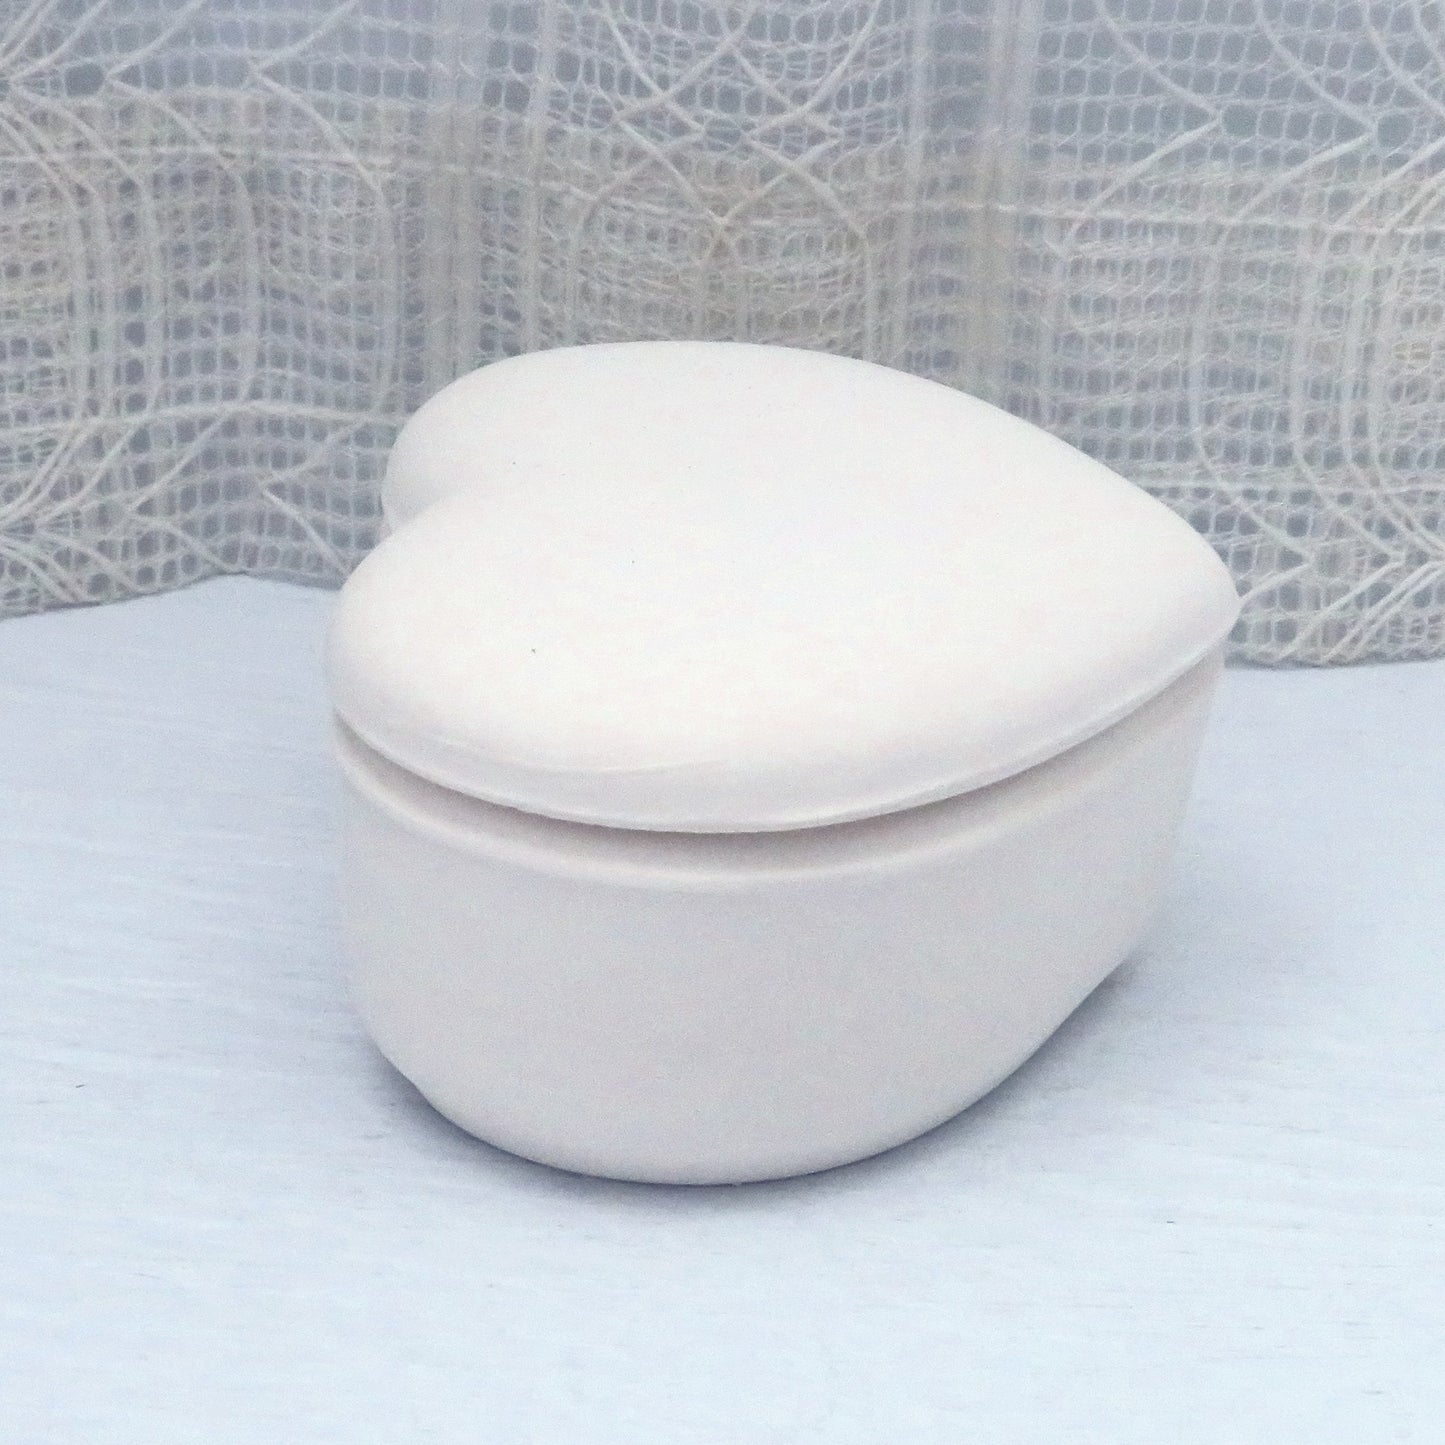 Handmade Ready to Paint Ceramic Heart Trinket Dish with Lid / Ceramic Jewelry Dish to Paint / Do It Yourself Ceramic Lidded Heart Box